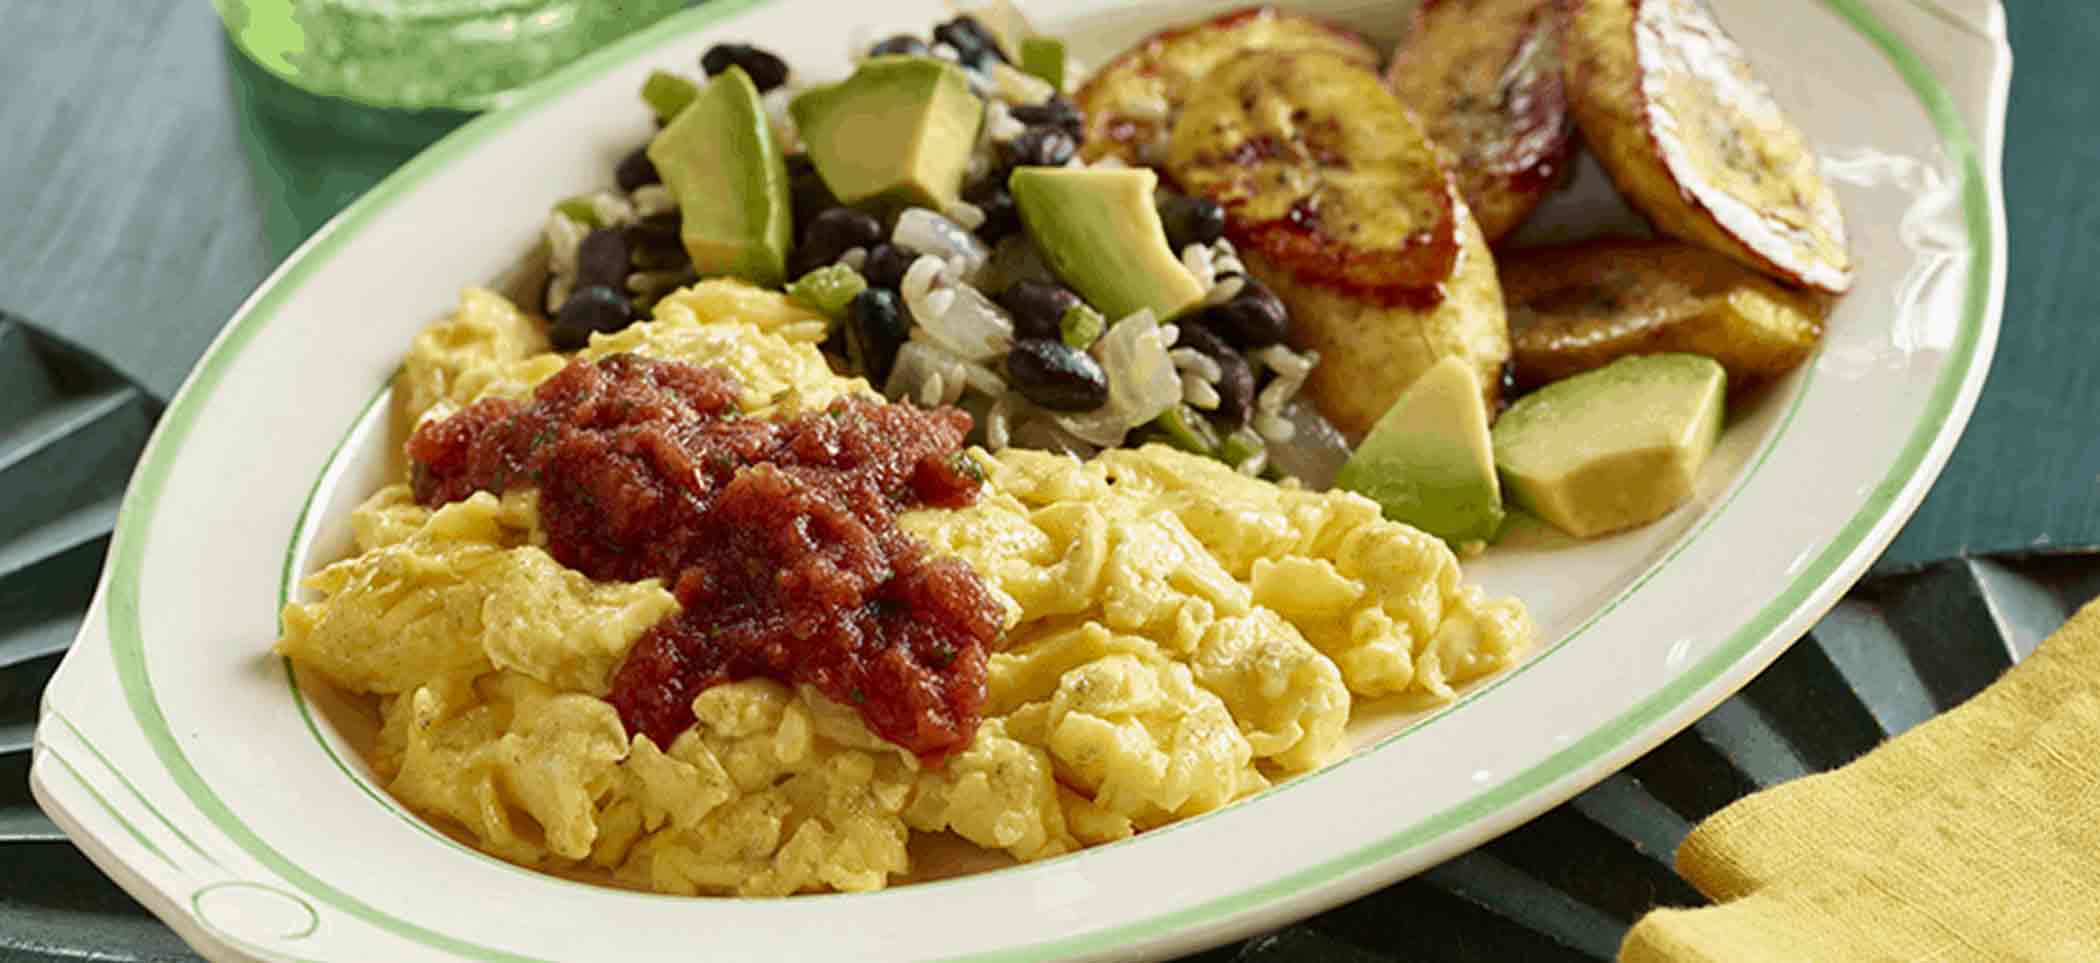 Cuban Scrambled Eggs With Sofrito, Black Beans and Rice (Cuba)